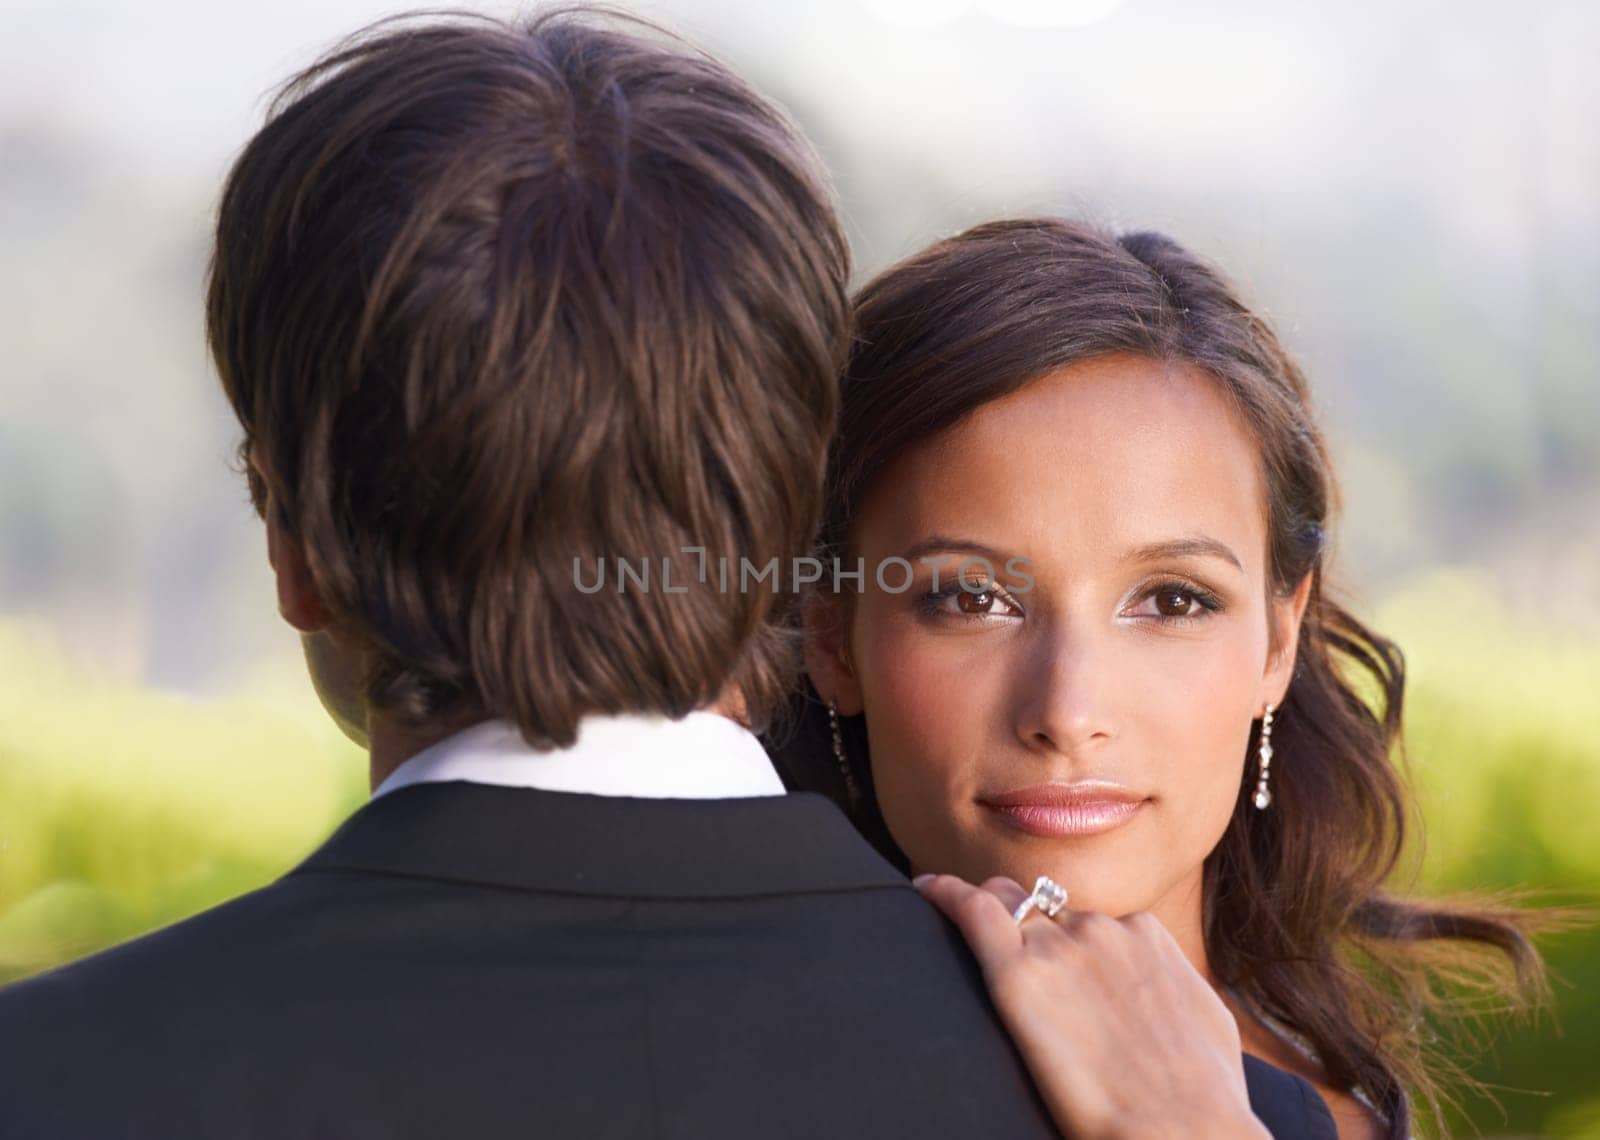 Bride, portrait and hug on wedding day for love, support and excited for marriage and commitment. Happy couple, romance and embrace at outdoor ceremony, loyalty and pride for ring and partnership.